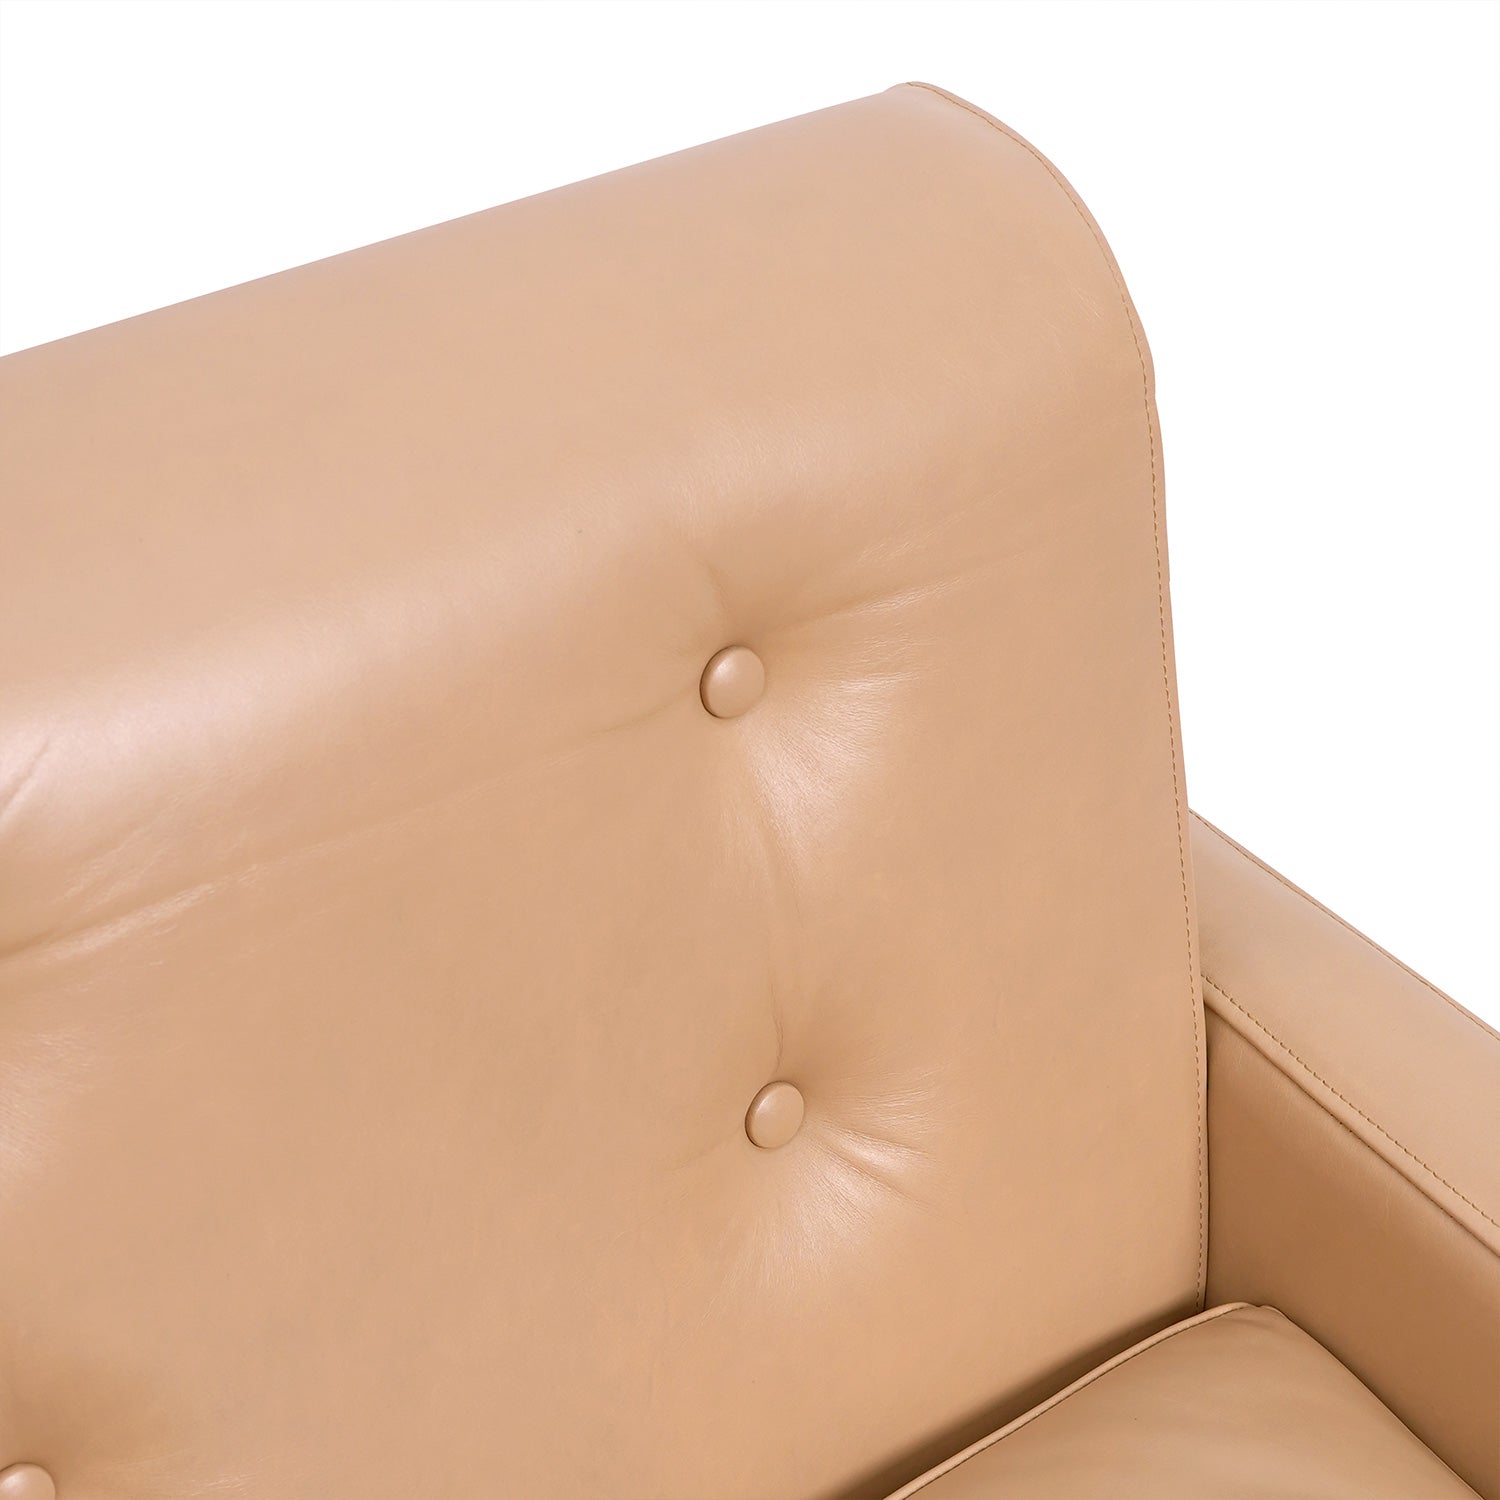 Fletcher Inka Leather Chair Cognac Front Close Up